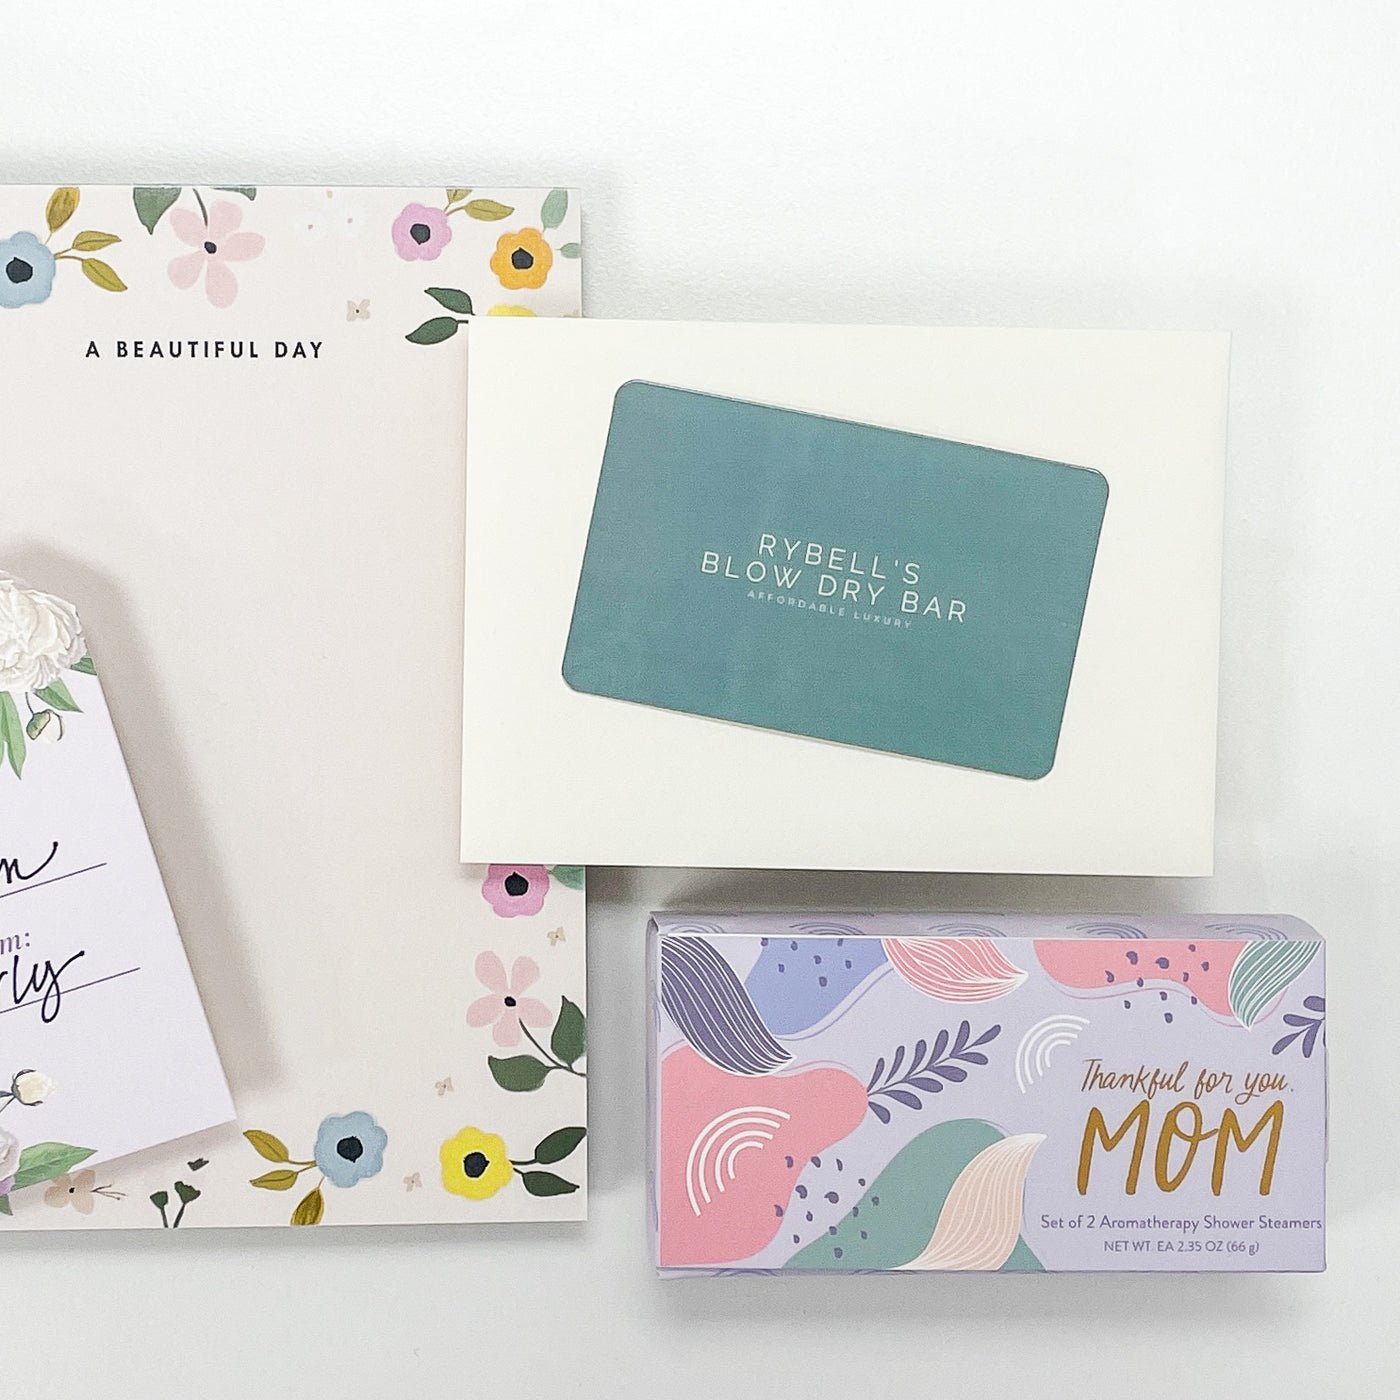 RyBell’s X Greenstar Paperie Petite Mother's Day Bundle